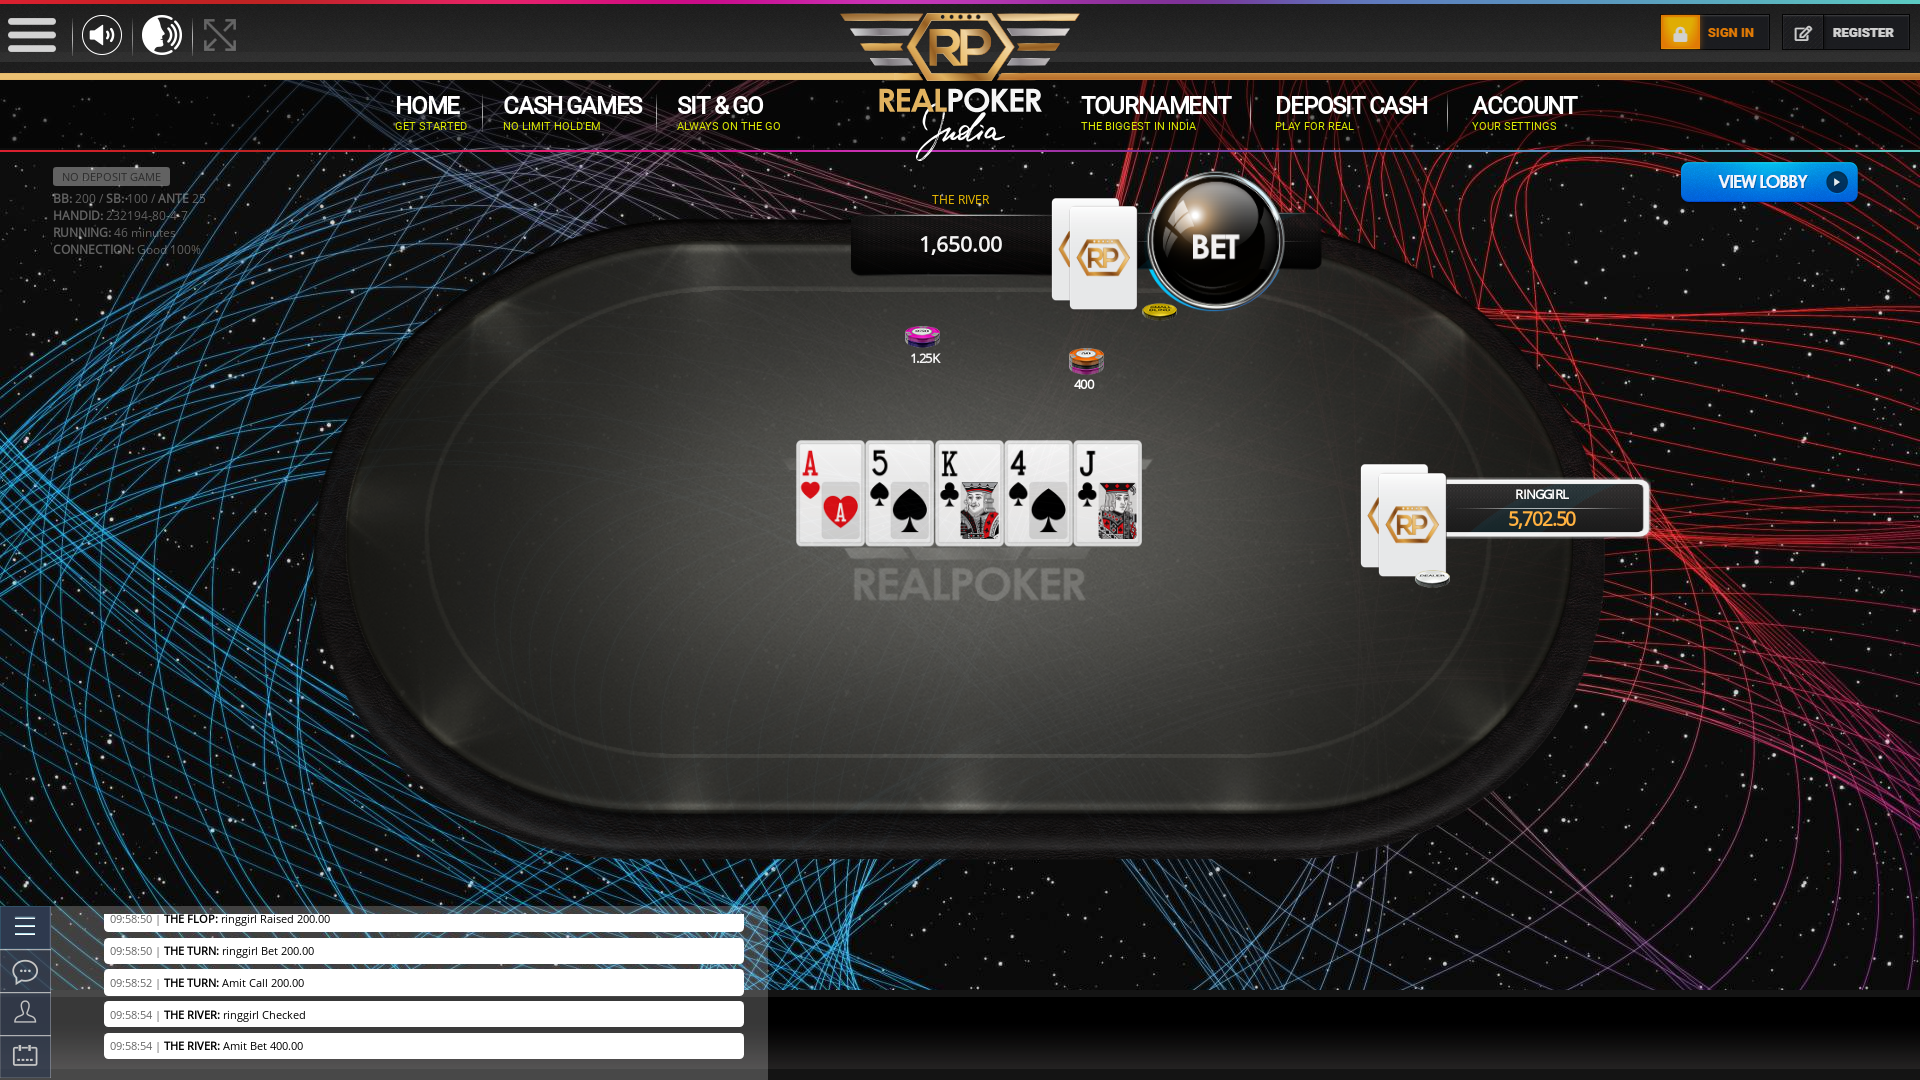 Indian online poker on a 10 player table in the 46th minute match up